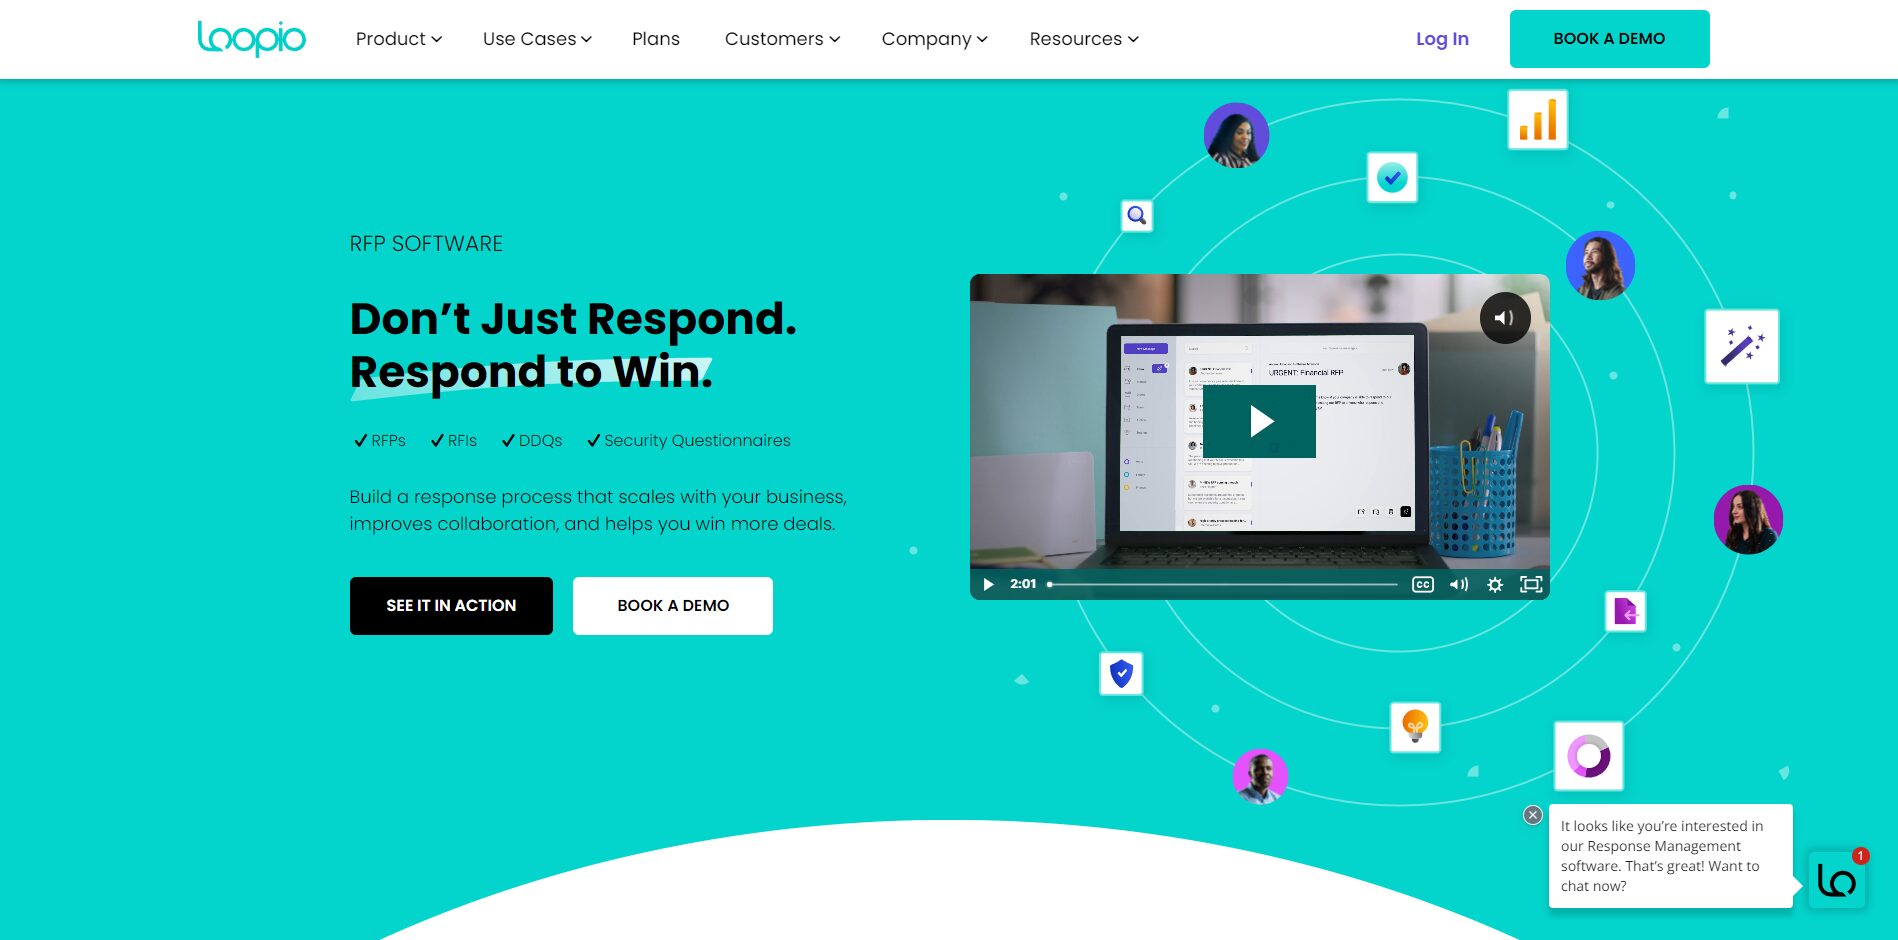 Loopio Home Page, above the fold